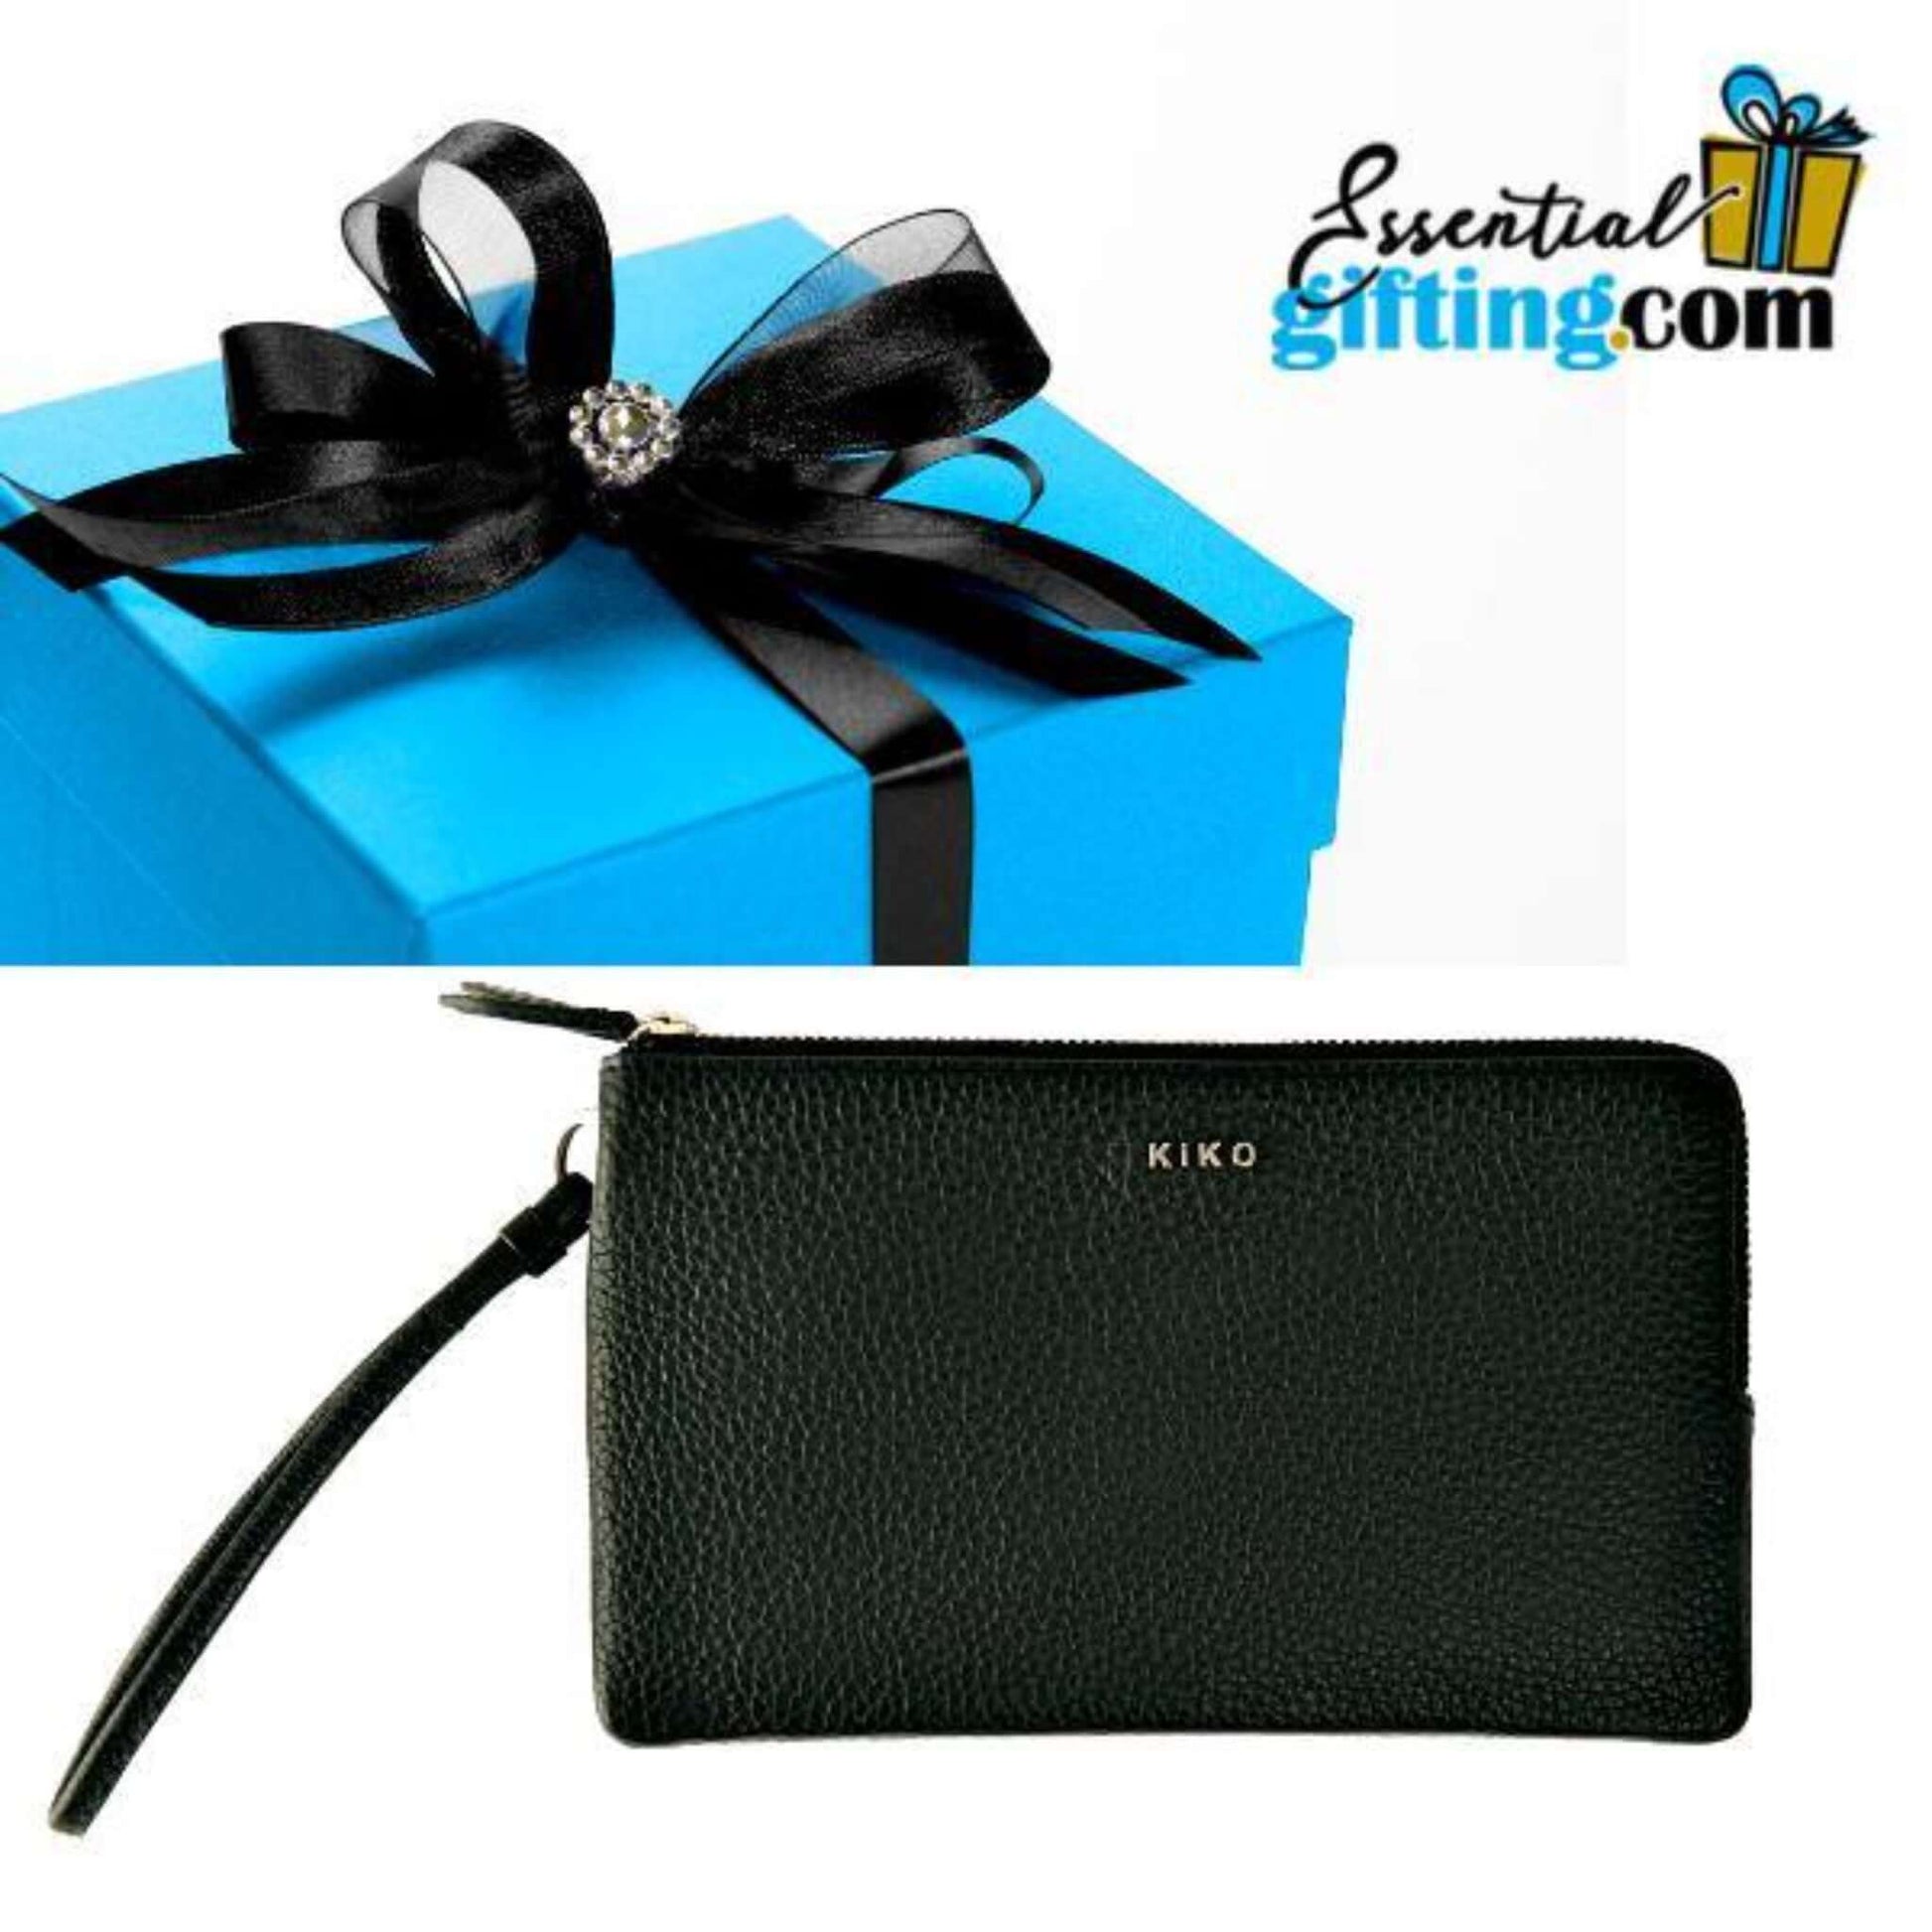 https://essentialgifting.com/products/handbag-wristlet-wallet-with-double-zipper 